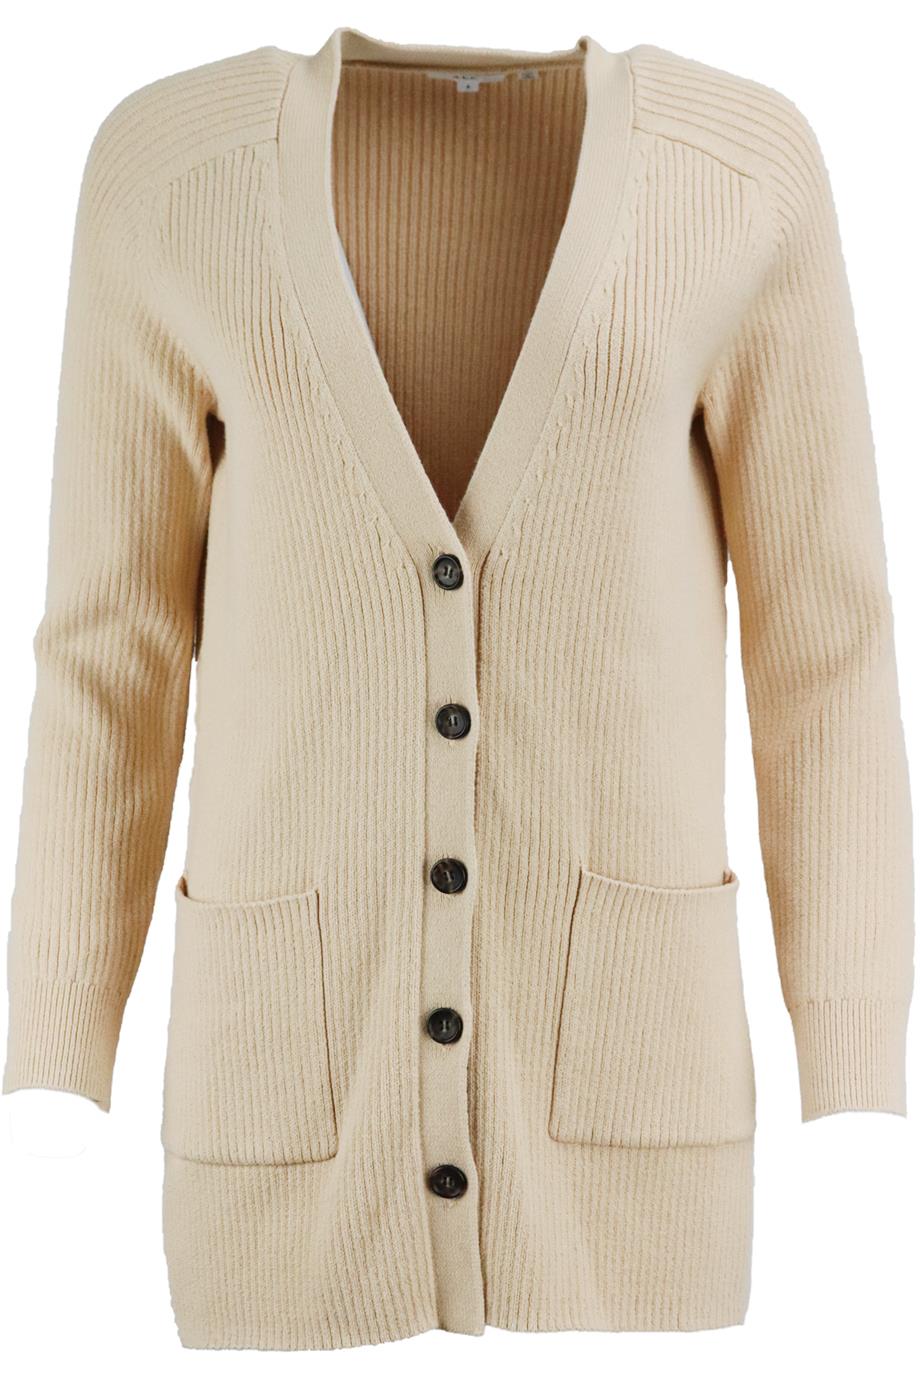 A.L.C. RIBBED COTTON BLEND CARDIGAN SMALL